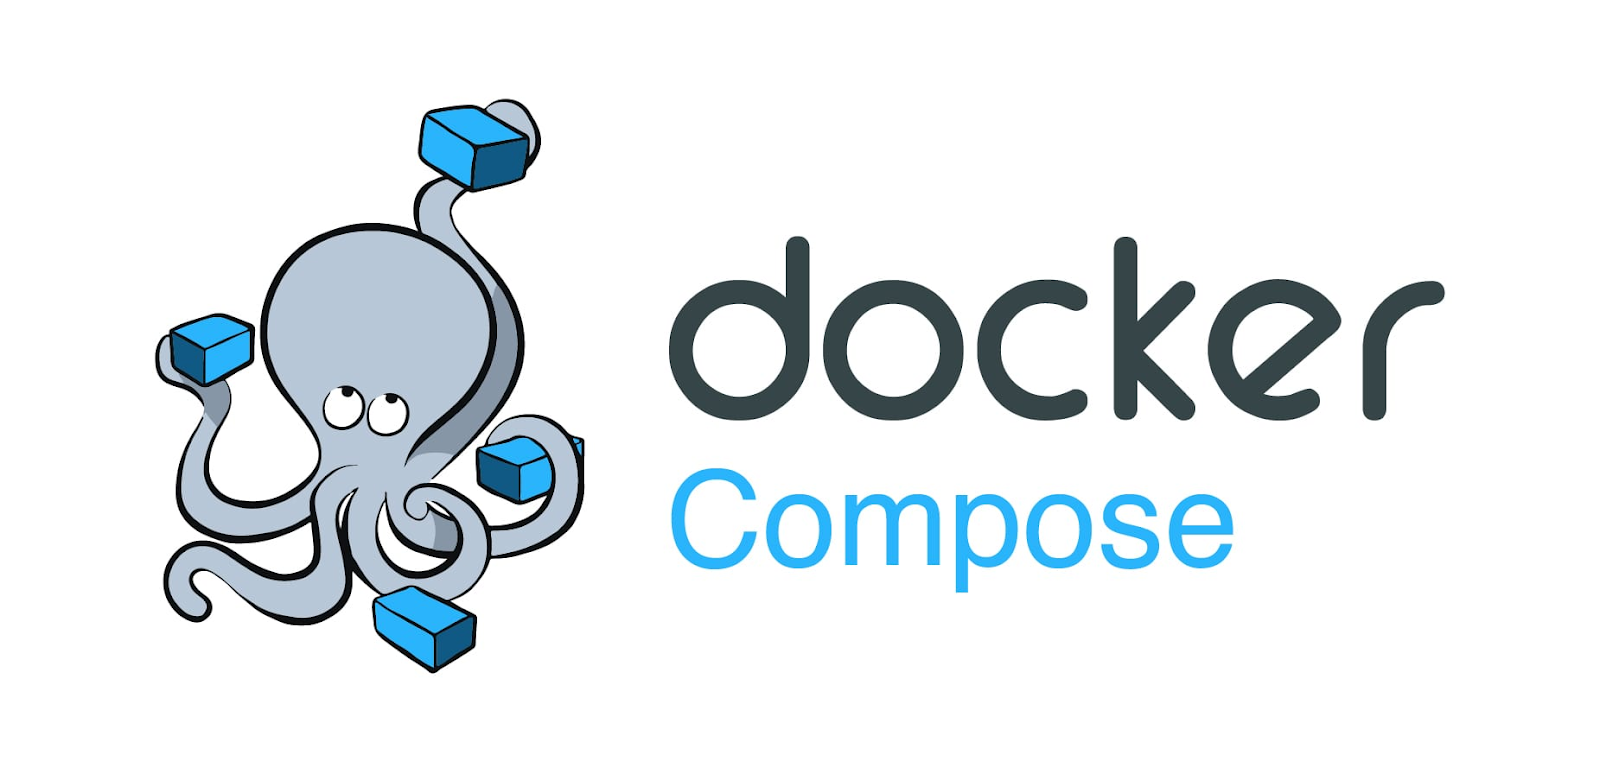 Docker logo depicting an octopus grasping blocks, accompanied by the text "Docker Compose" next to it